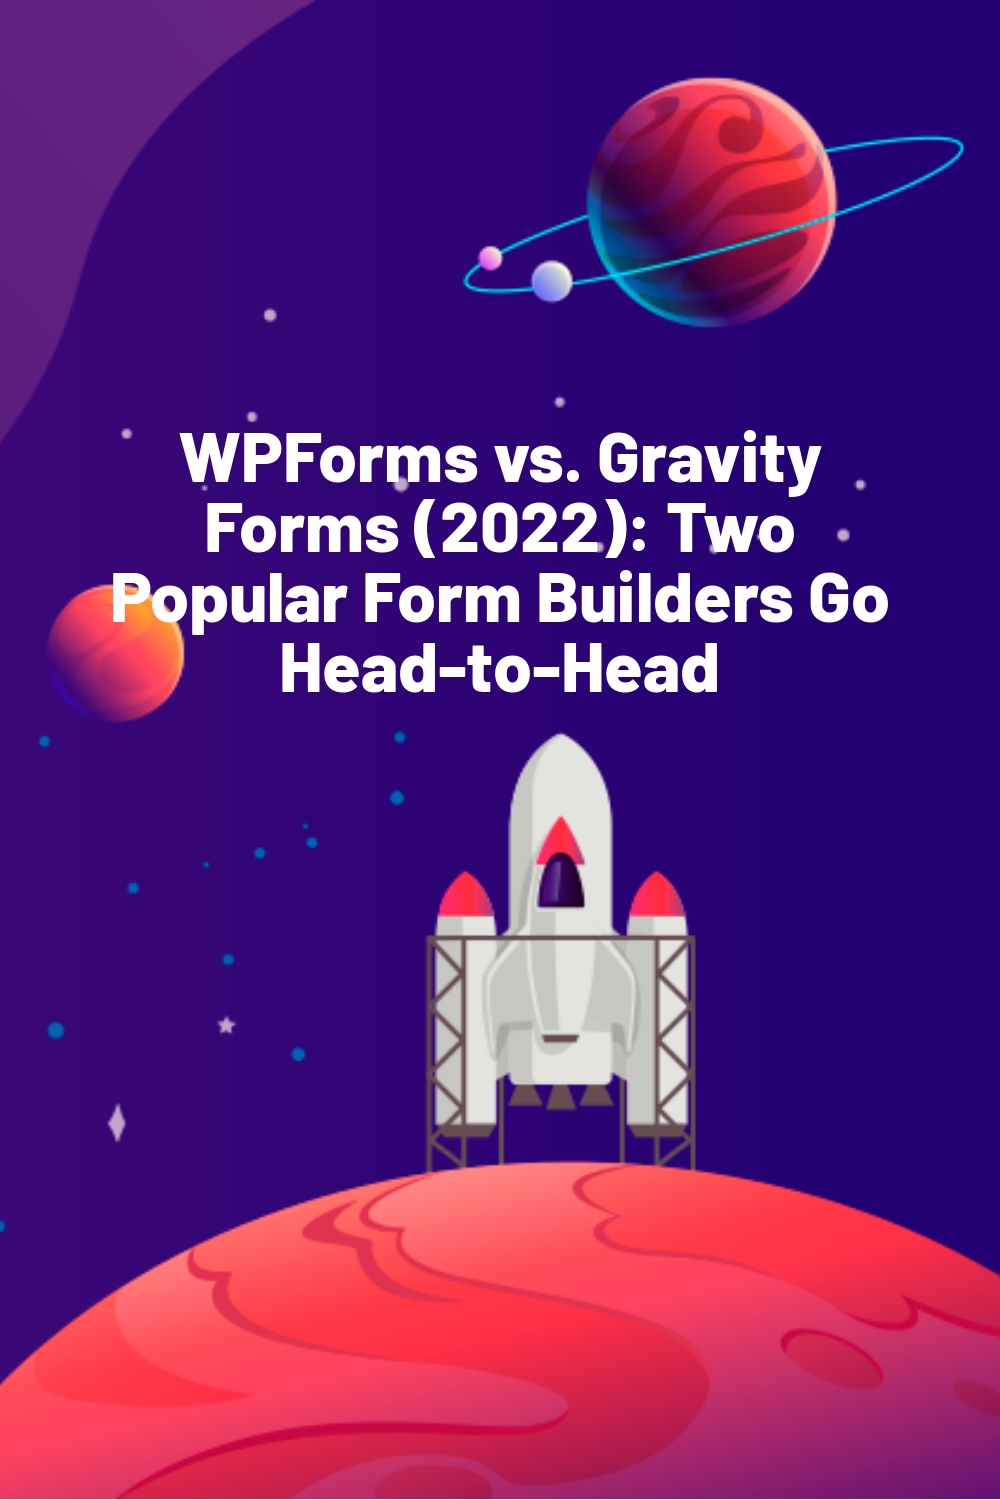 WPForms vs. Gravity Forms (2022): Two Popular Form Builders Go Head-to-Head